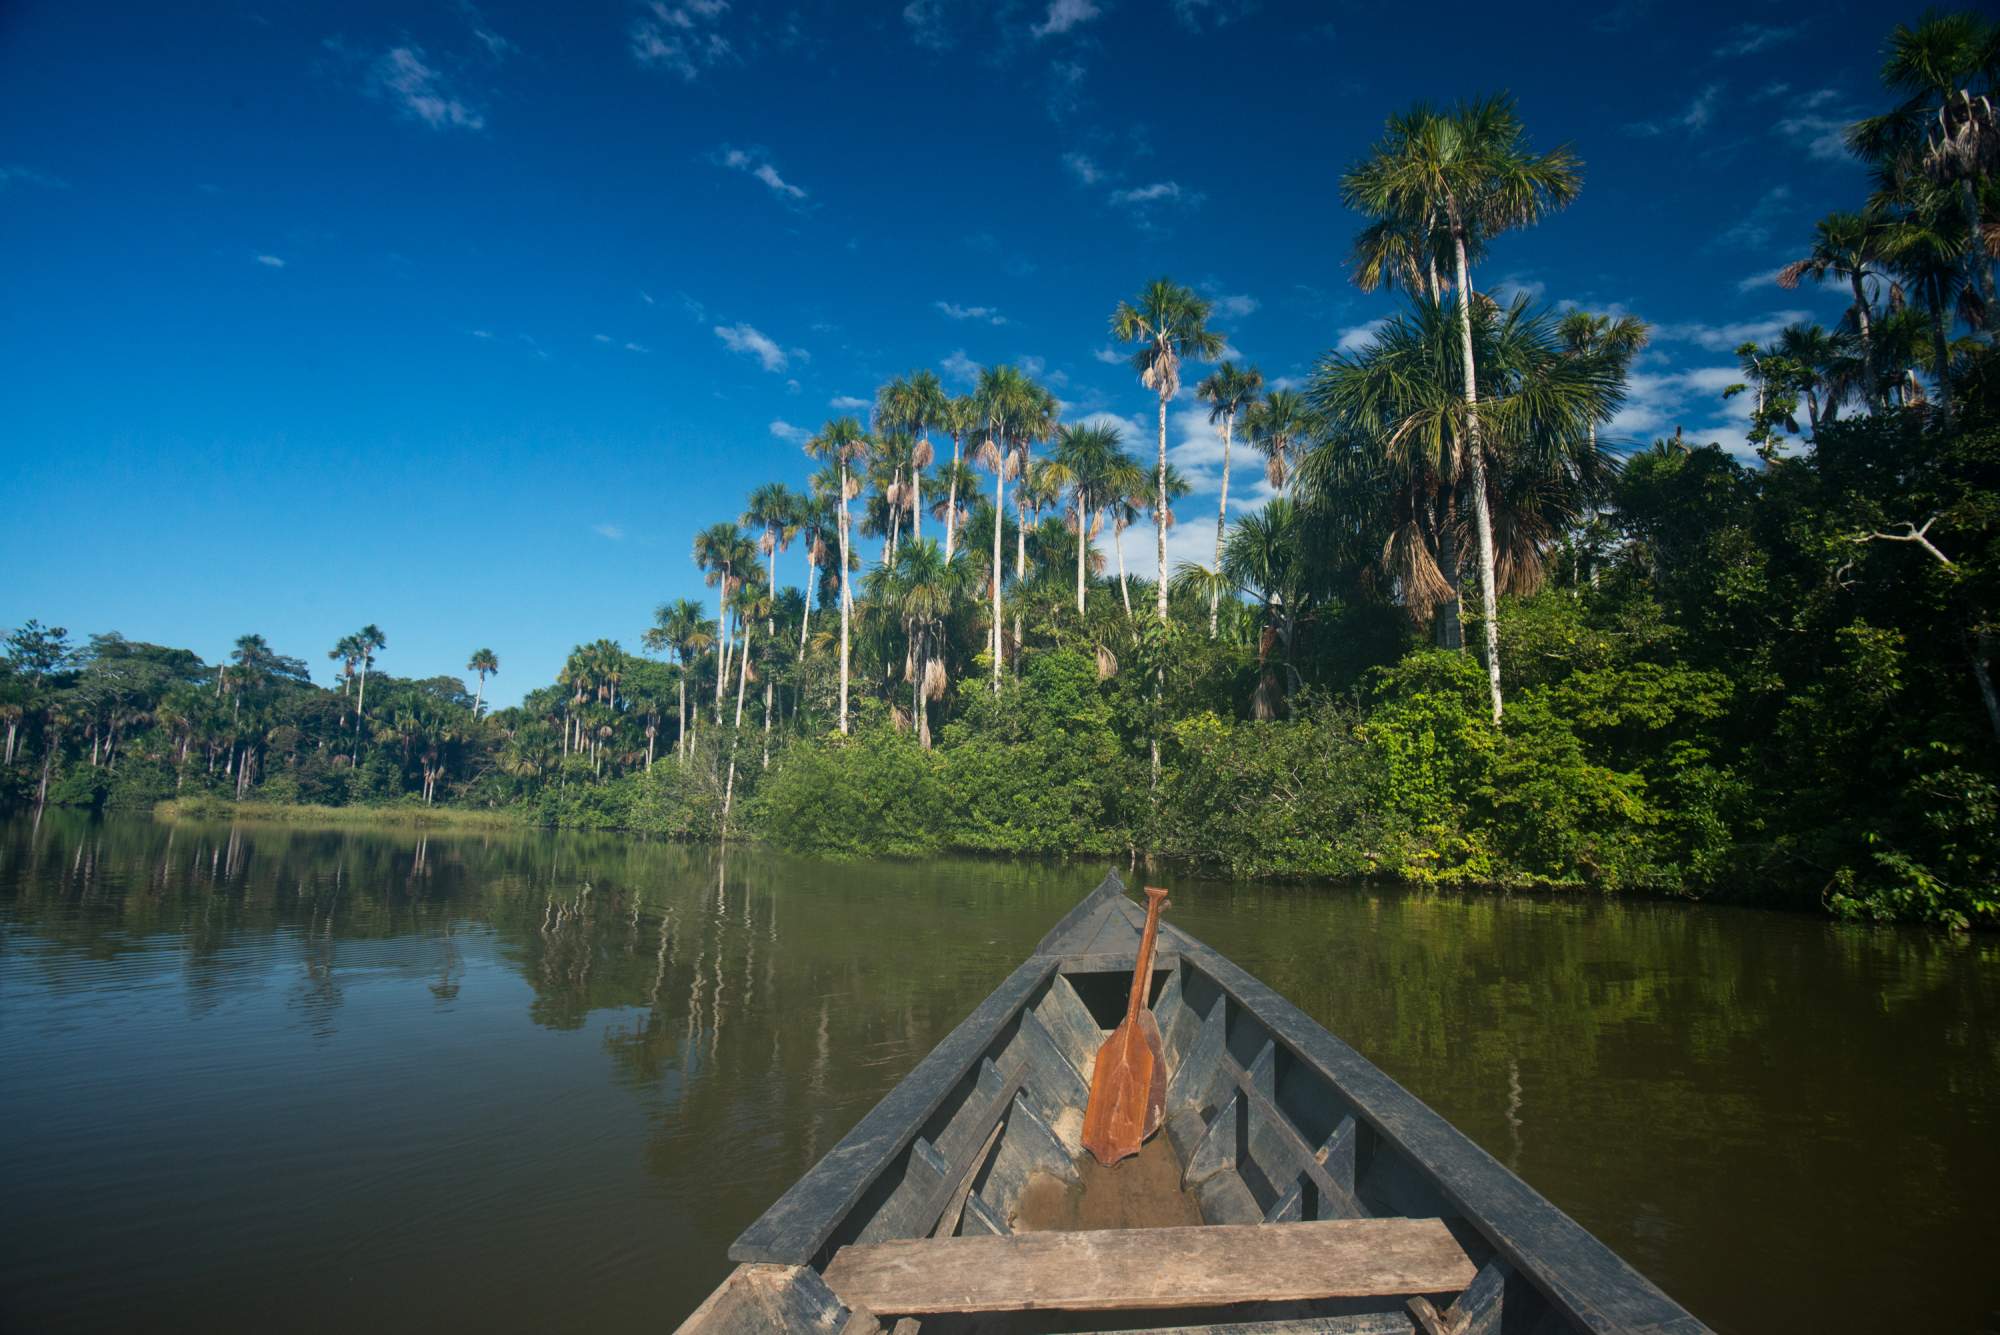 Amazon Rainforest view from canoe in water